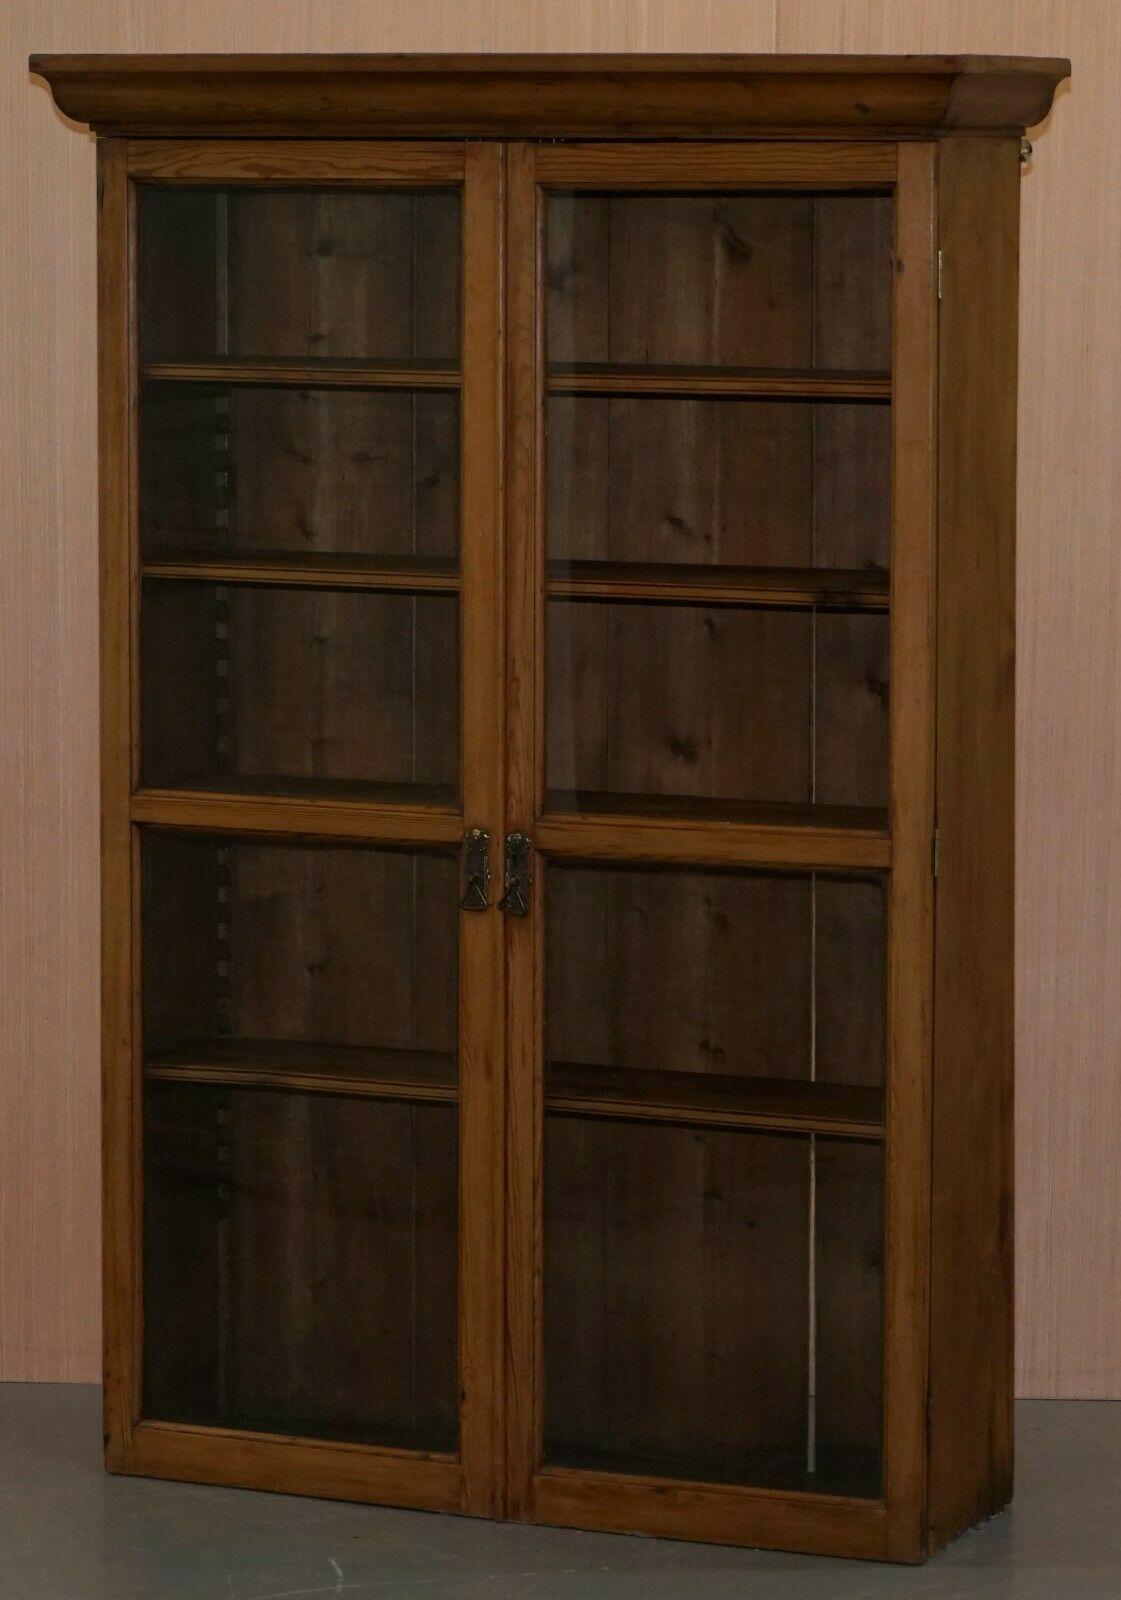 We are delighted to offer for sale this lovely solid pine library bookcase with glass doors and adjustable shelves.

A good looking and well-made bookcase, circa 1940, we have cleaned waxed and polished it from top to bottom.

This can also be